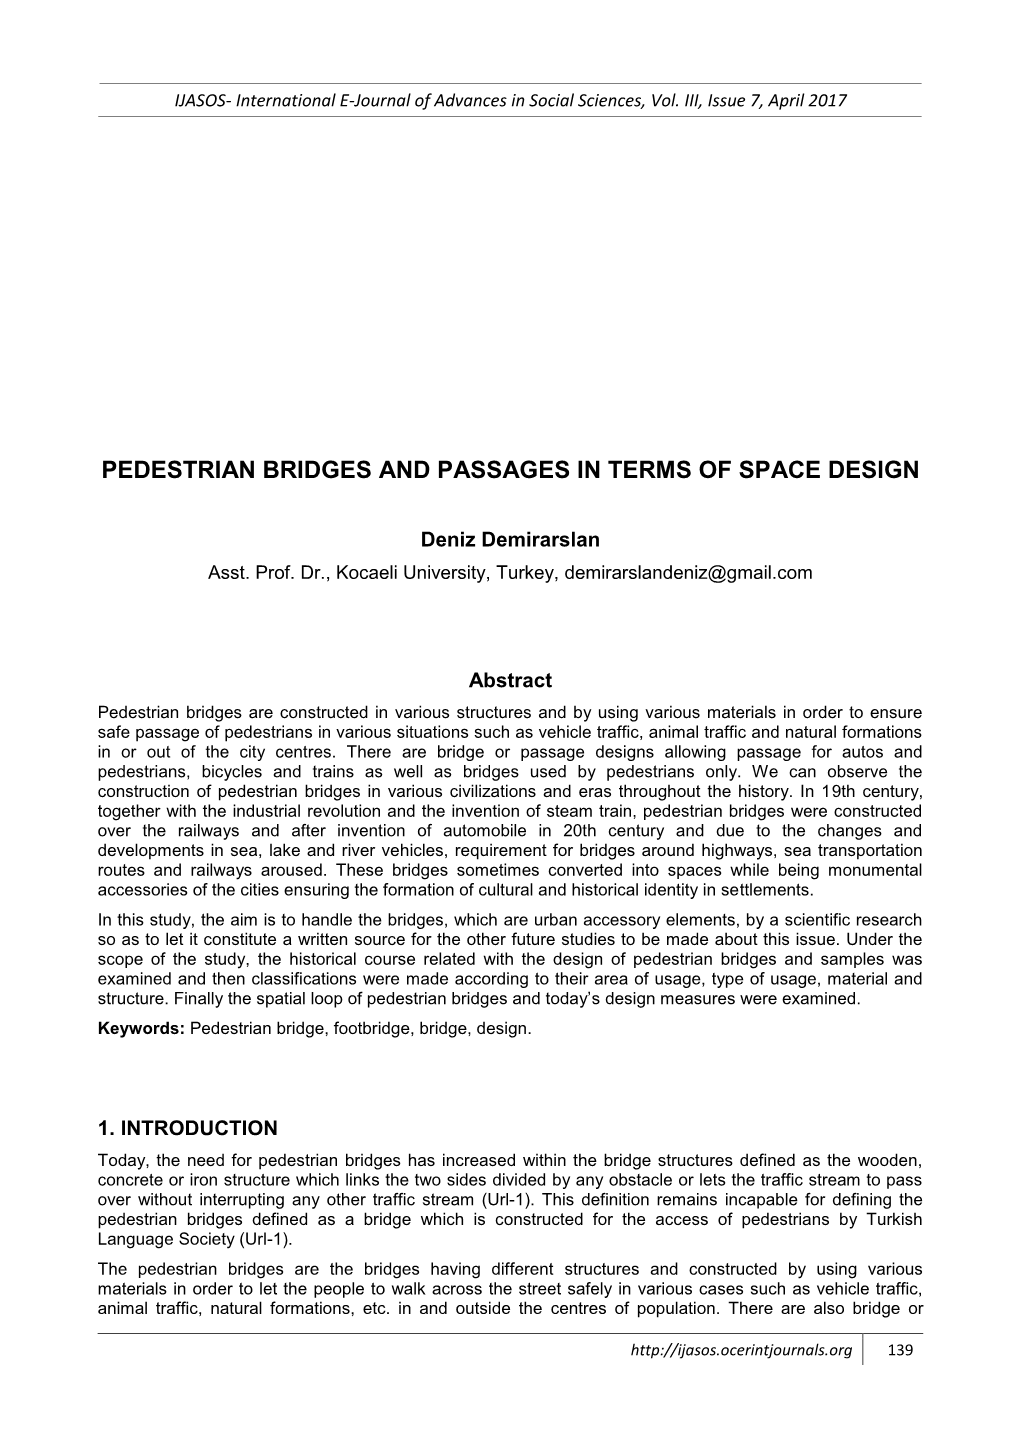 Pedestrian Bridges and Passages in Terms of Space Design